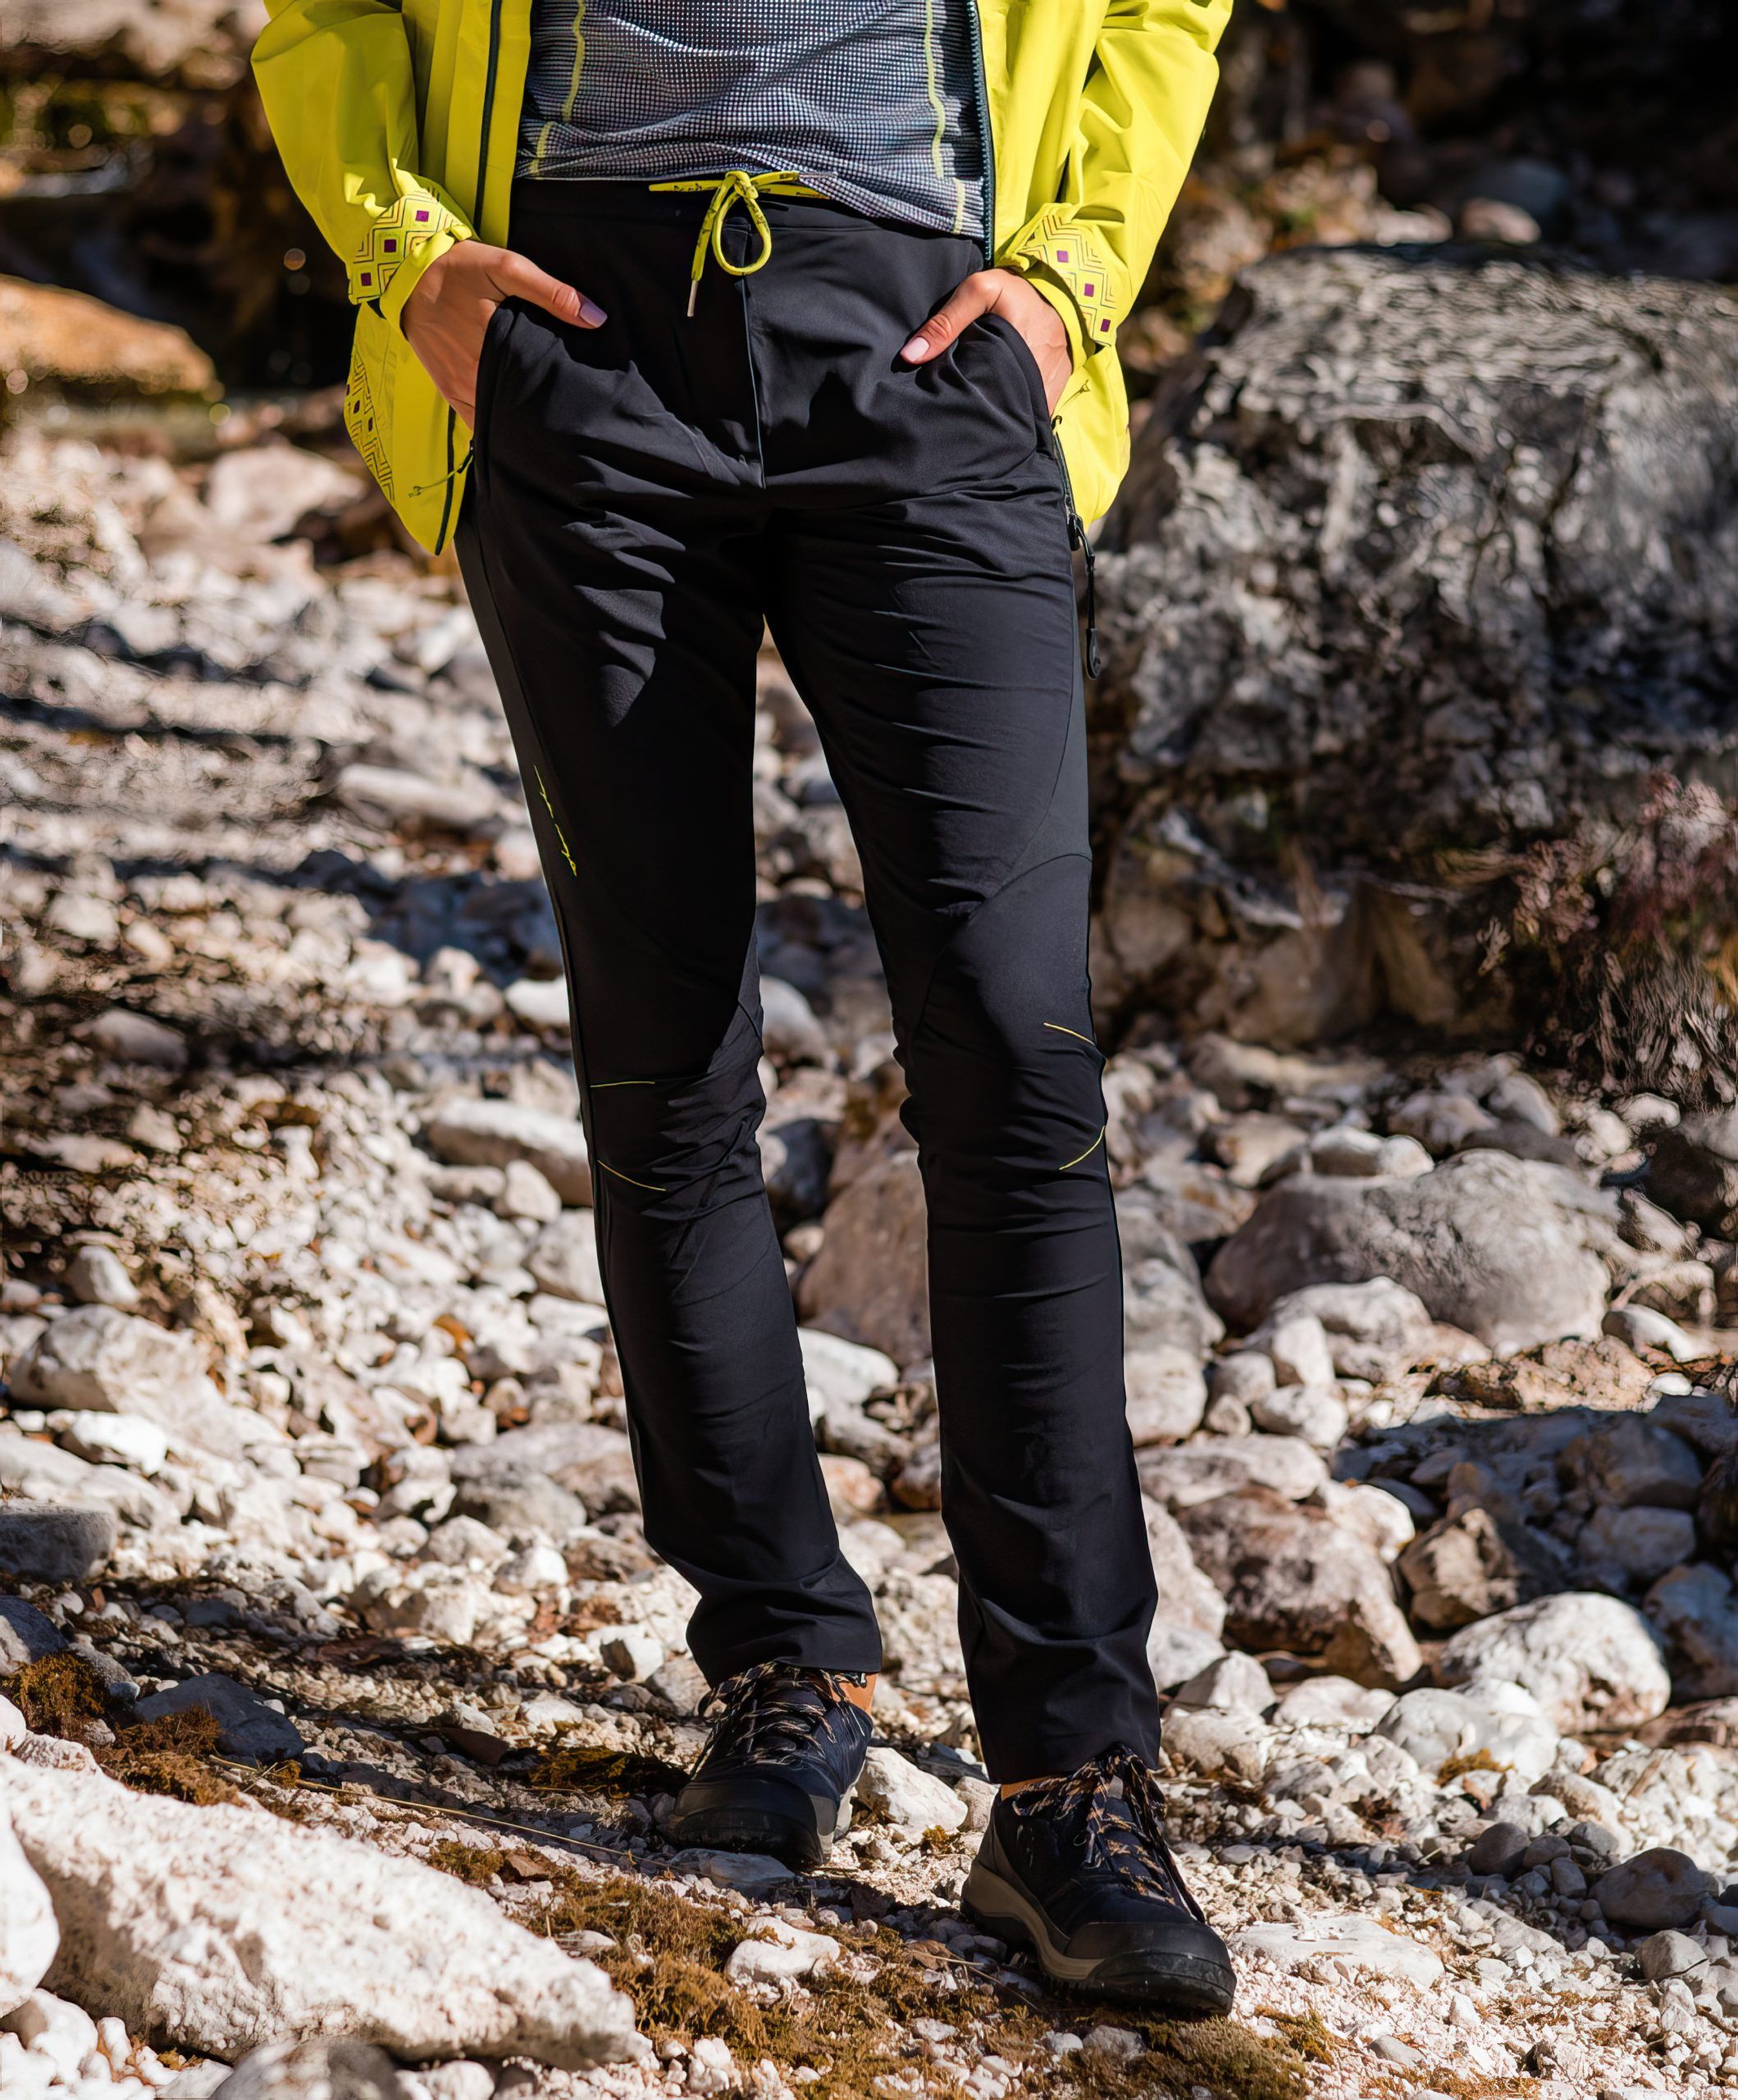 Akna comfit pants black from MAYA MAYA are highly breathable for women on their hikes.